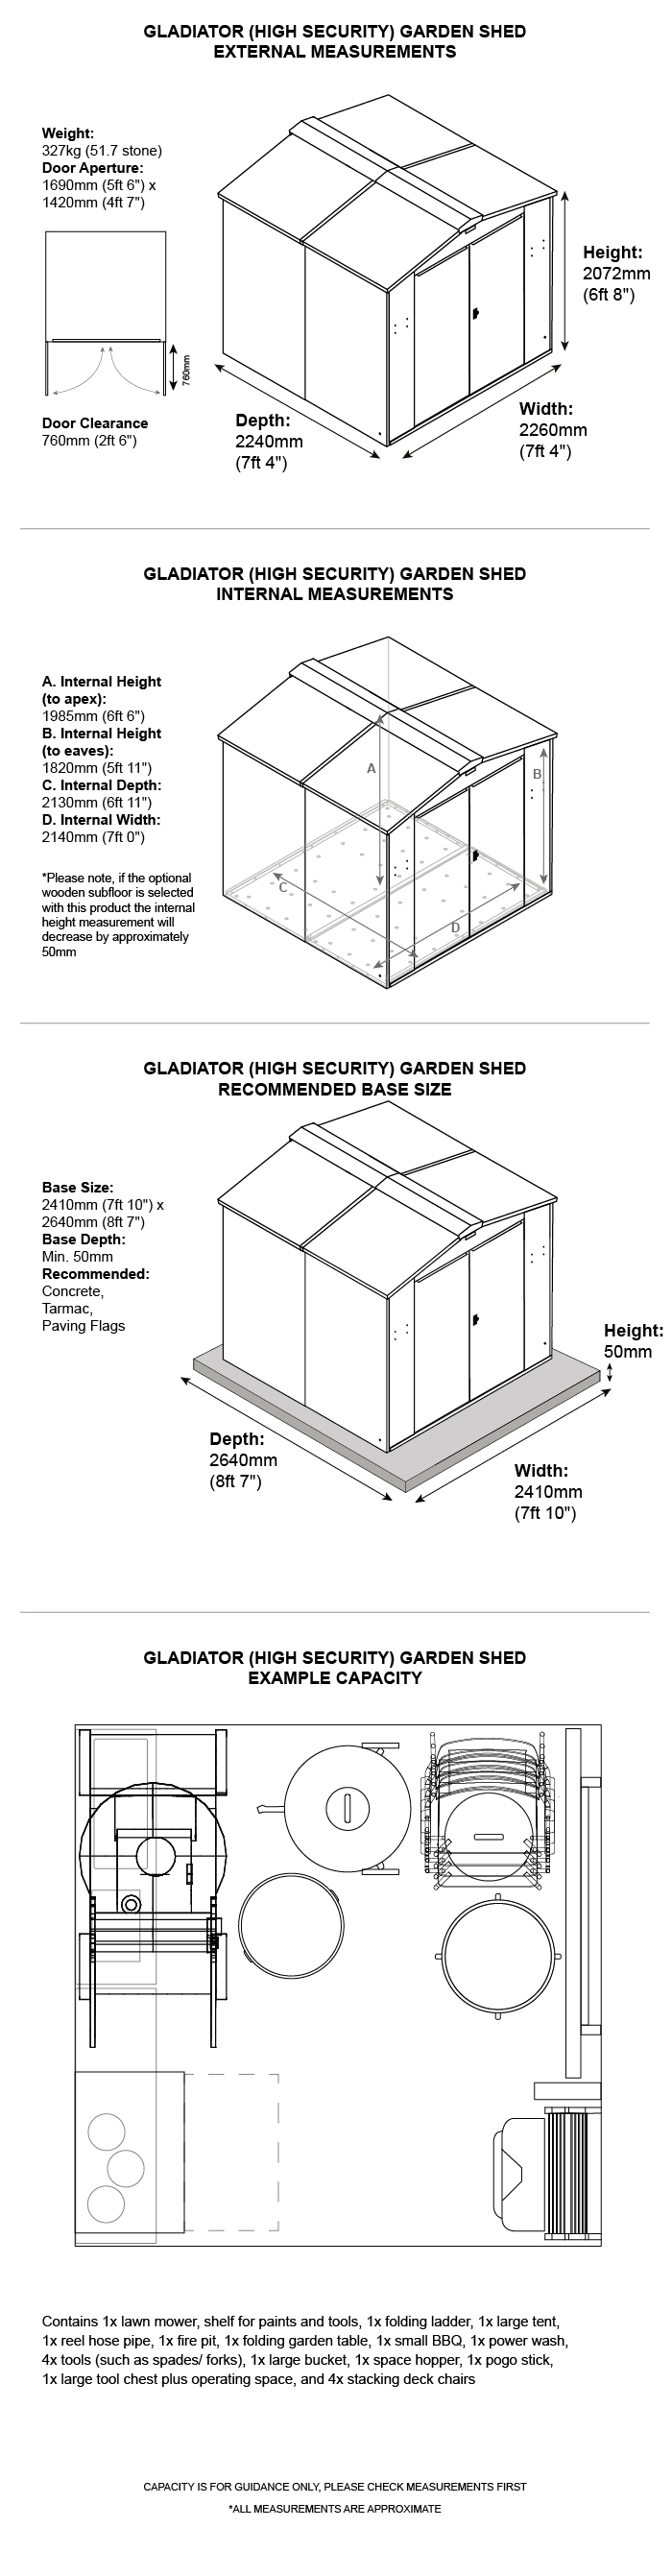 Gladiator shed dimensions